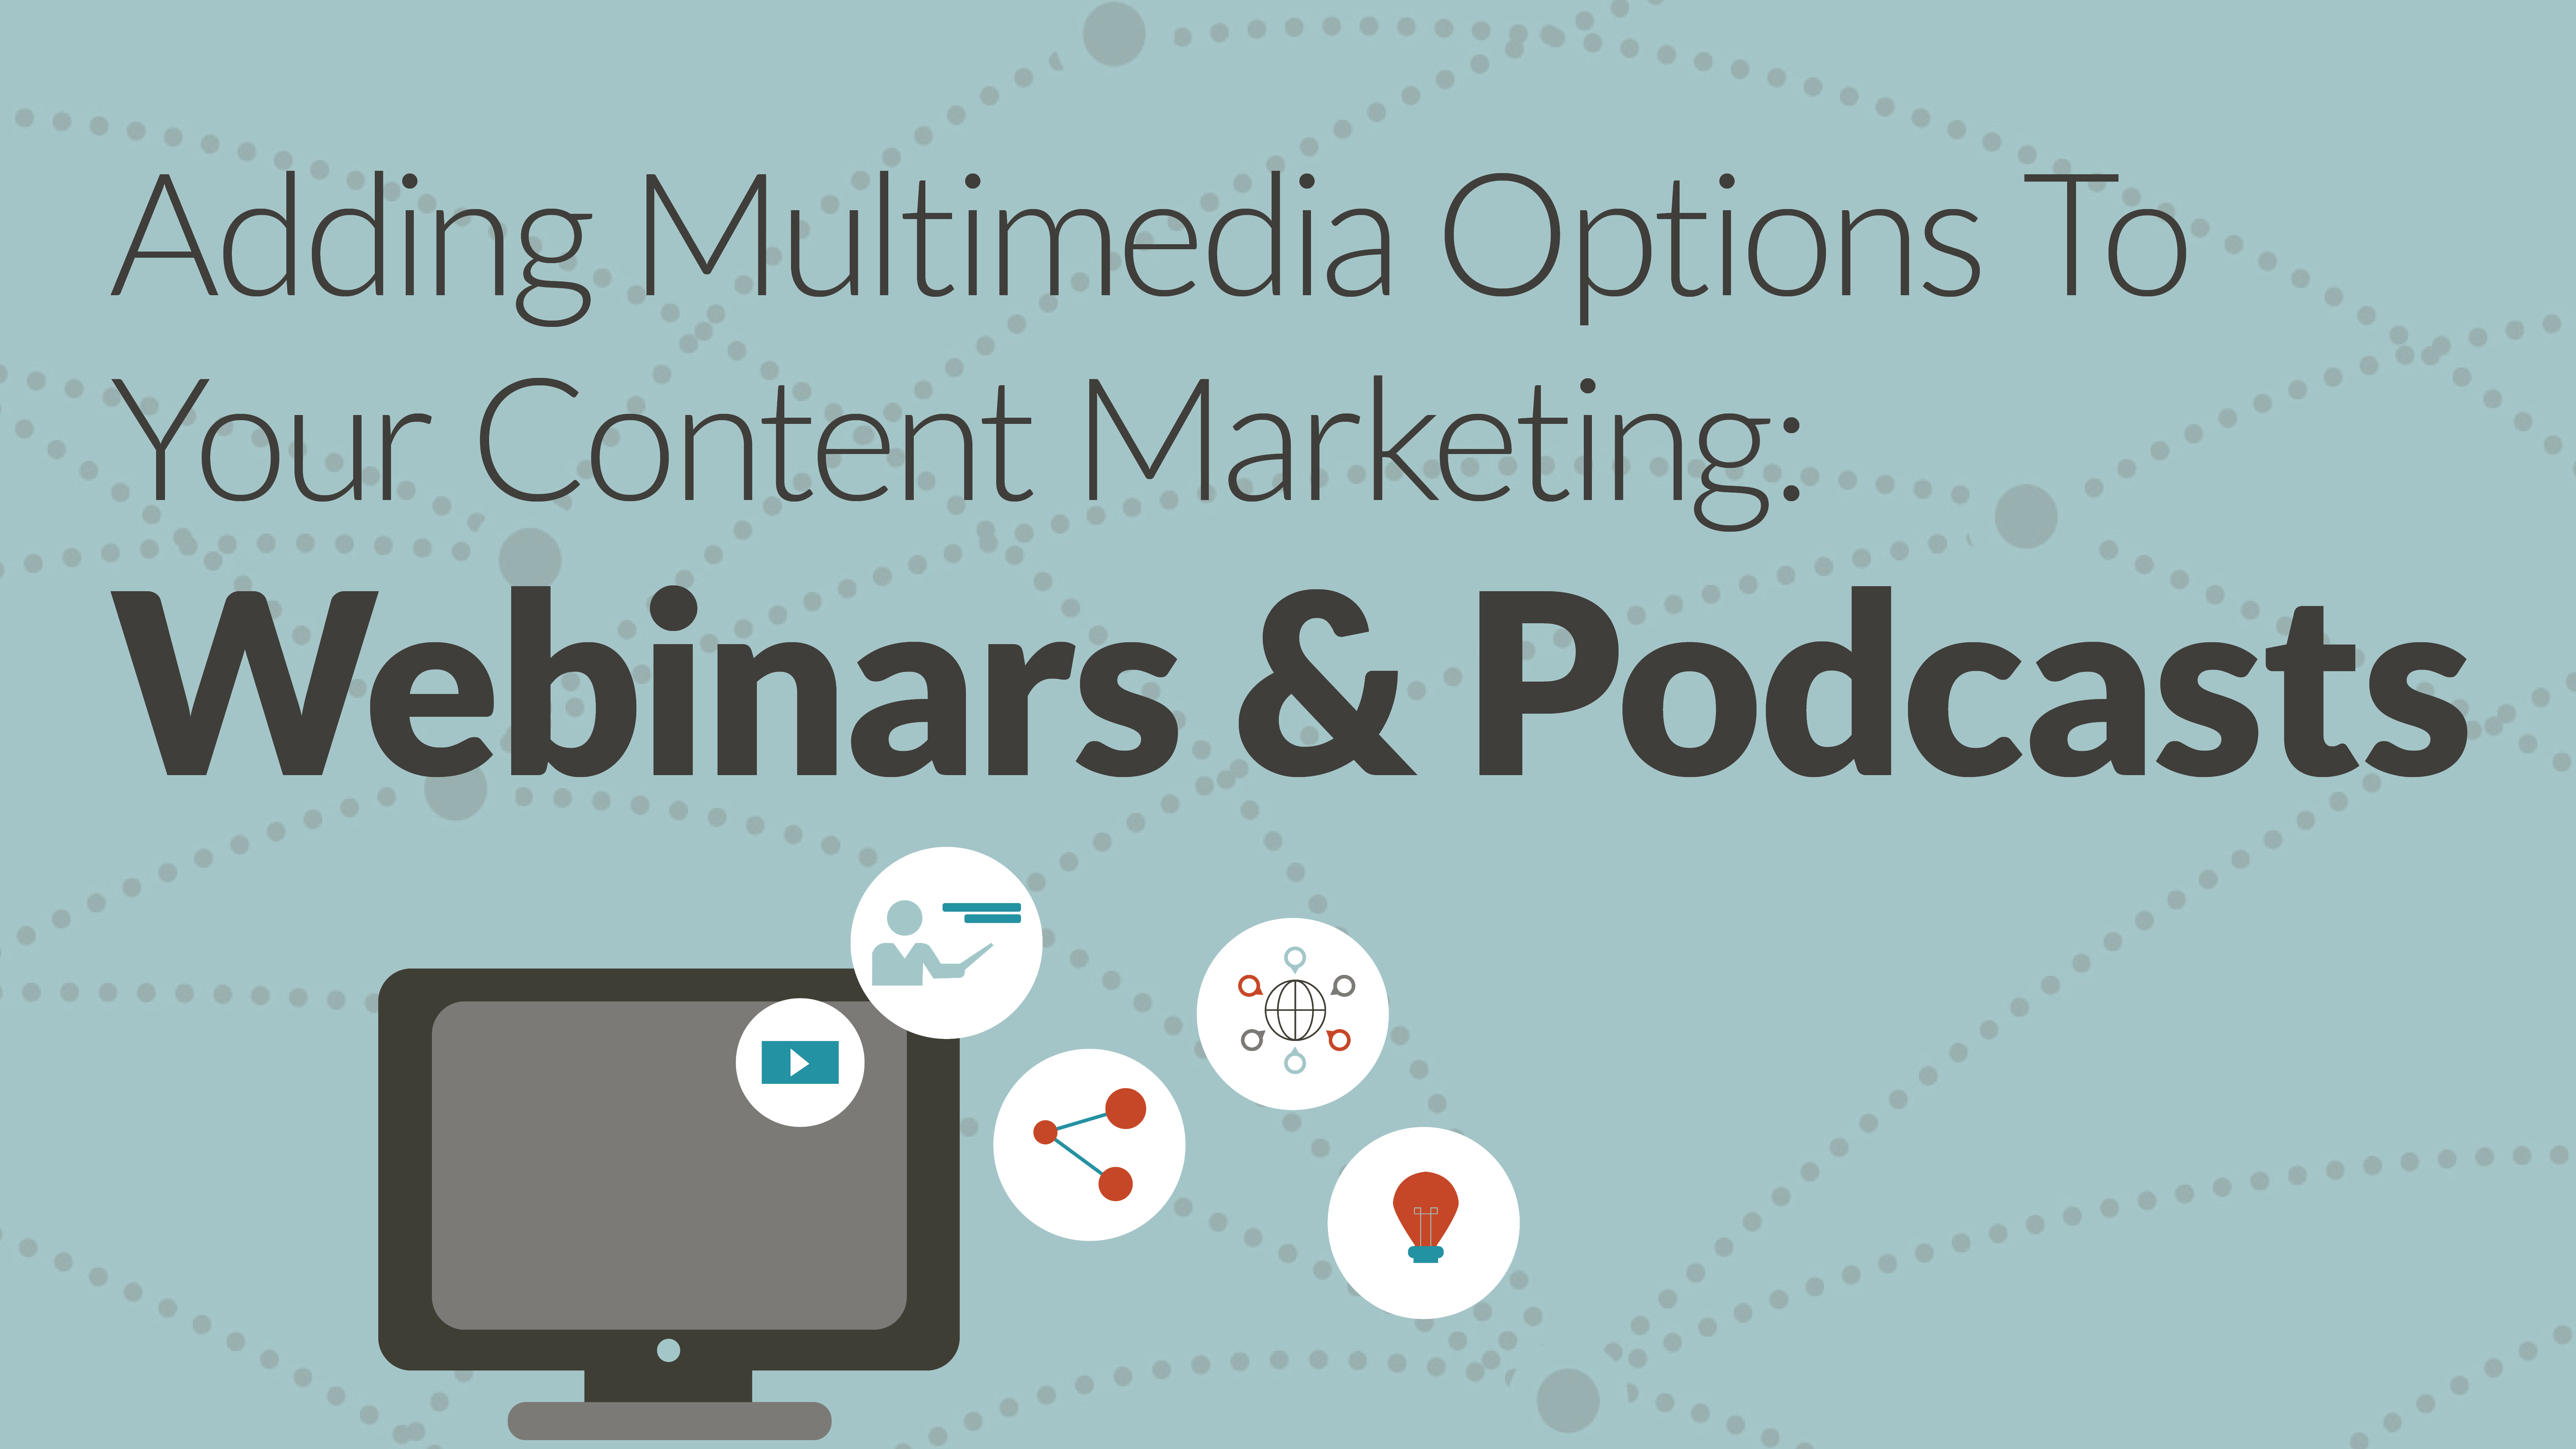 Adding Multimedia Options To Your Content Marketing: Webinars & Podcasts